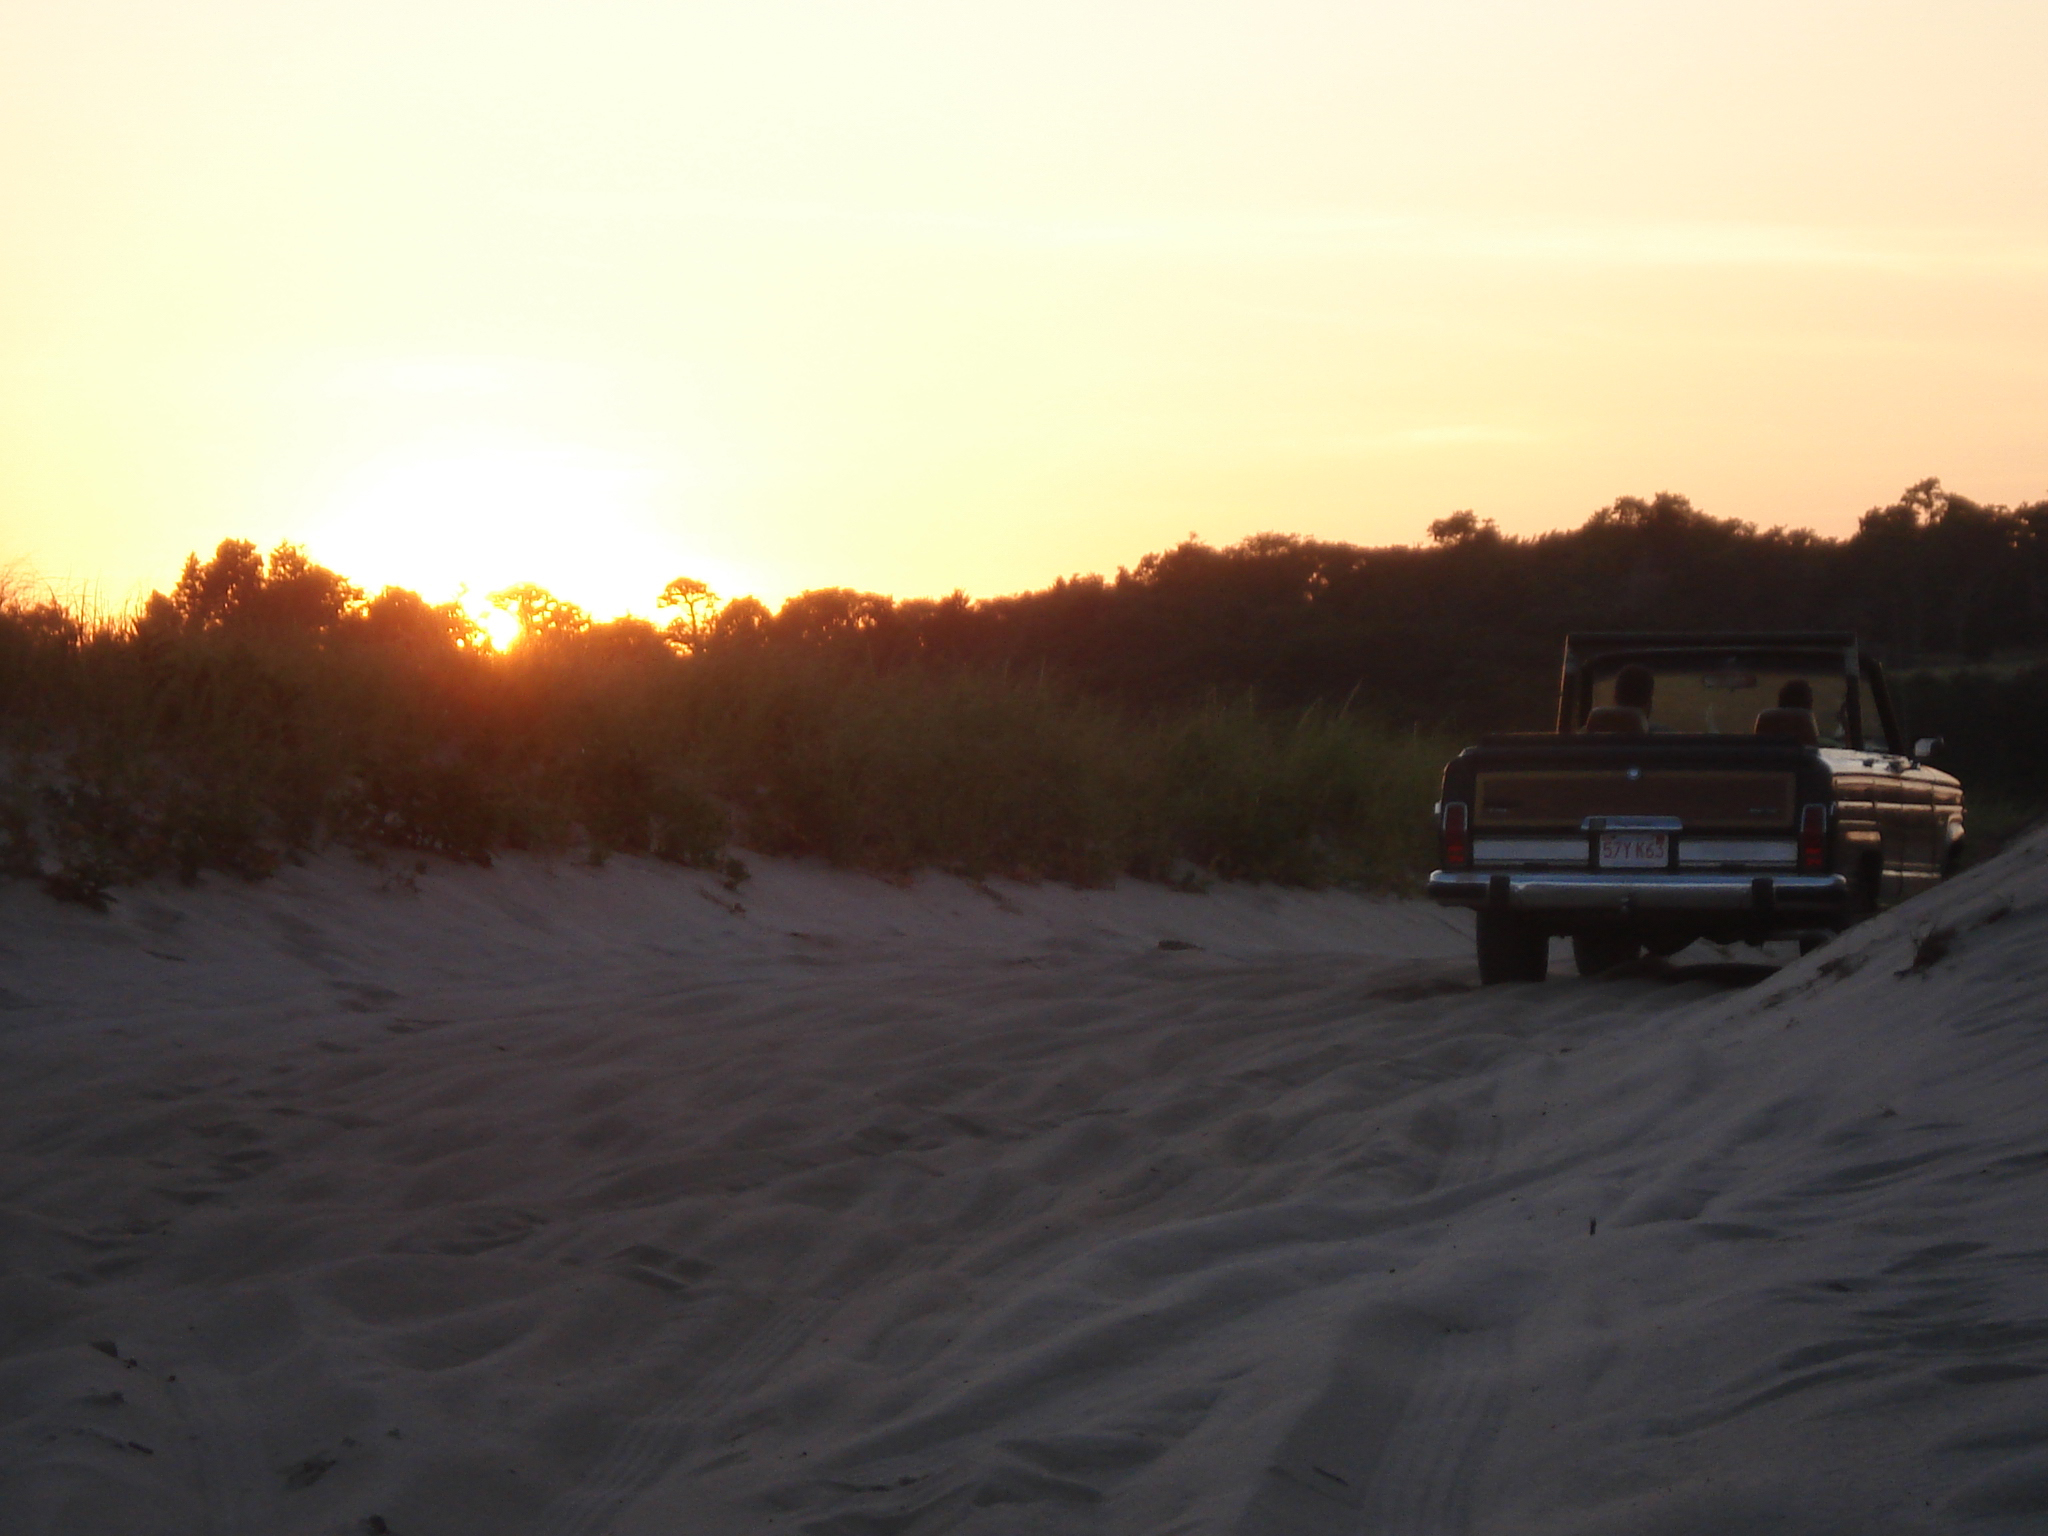 Heading Home from Nauset Beach (user submitted)